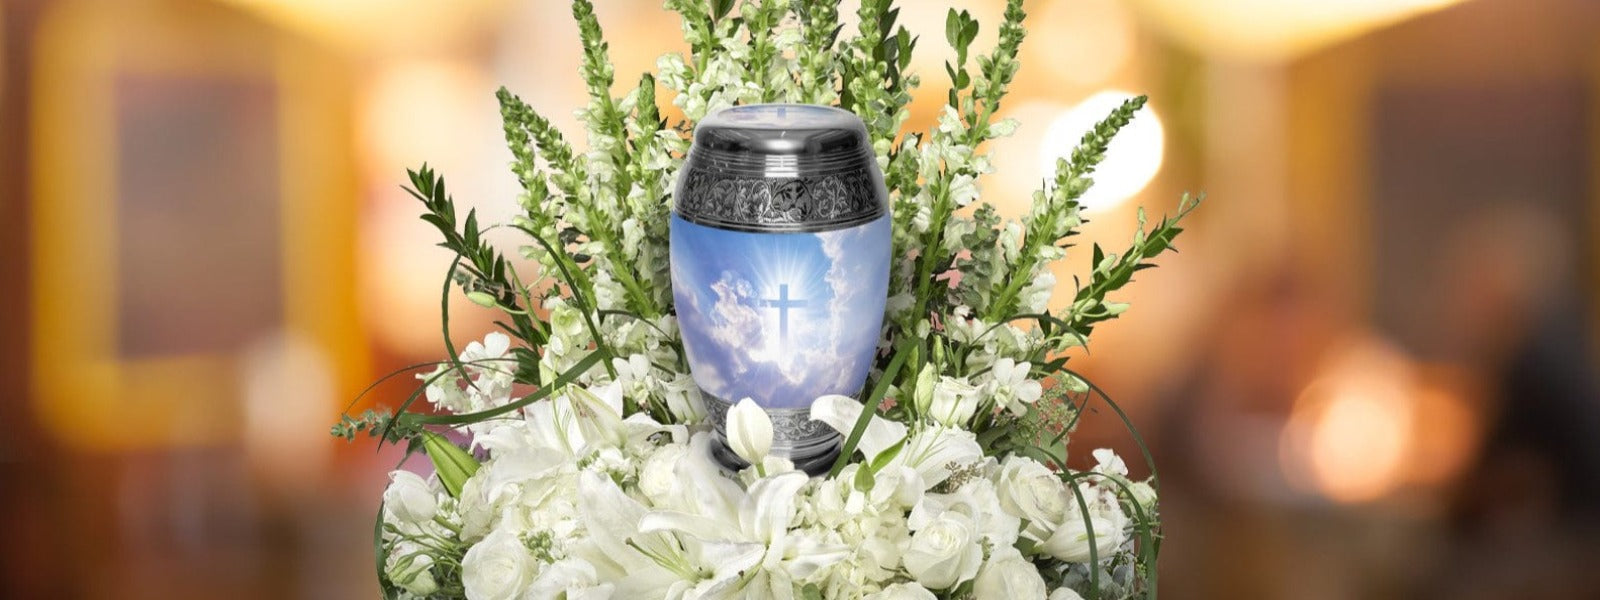 What Are The Religious Views About Cremation?